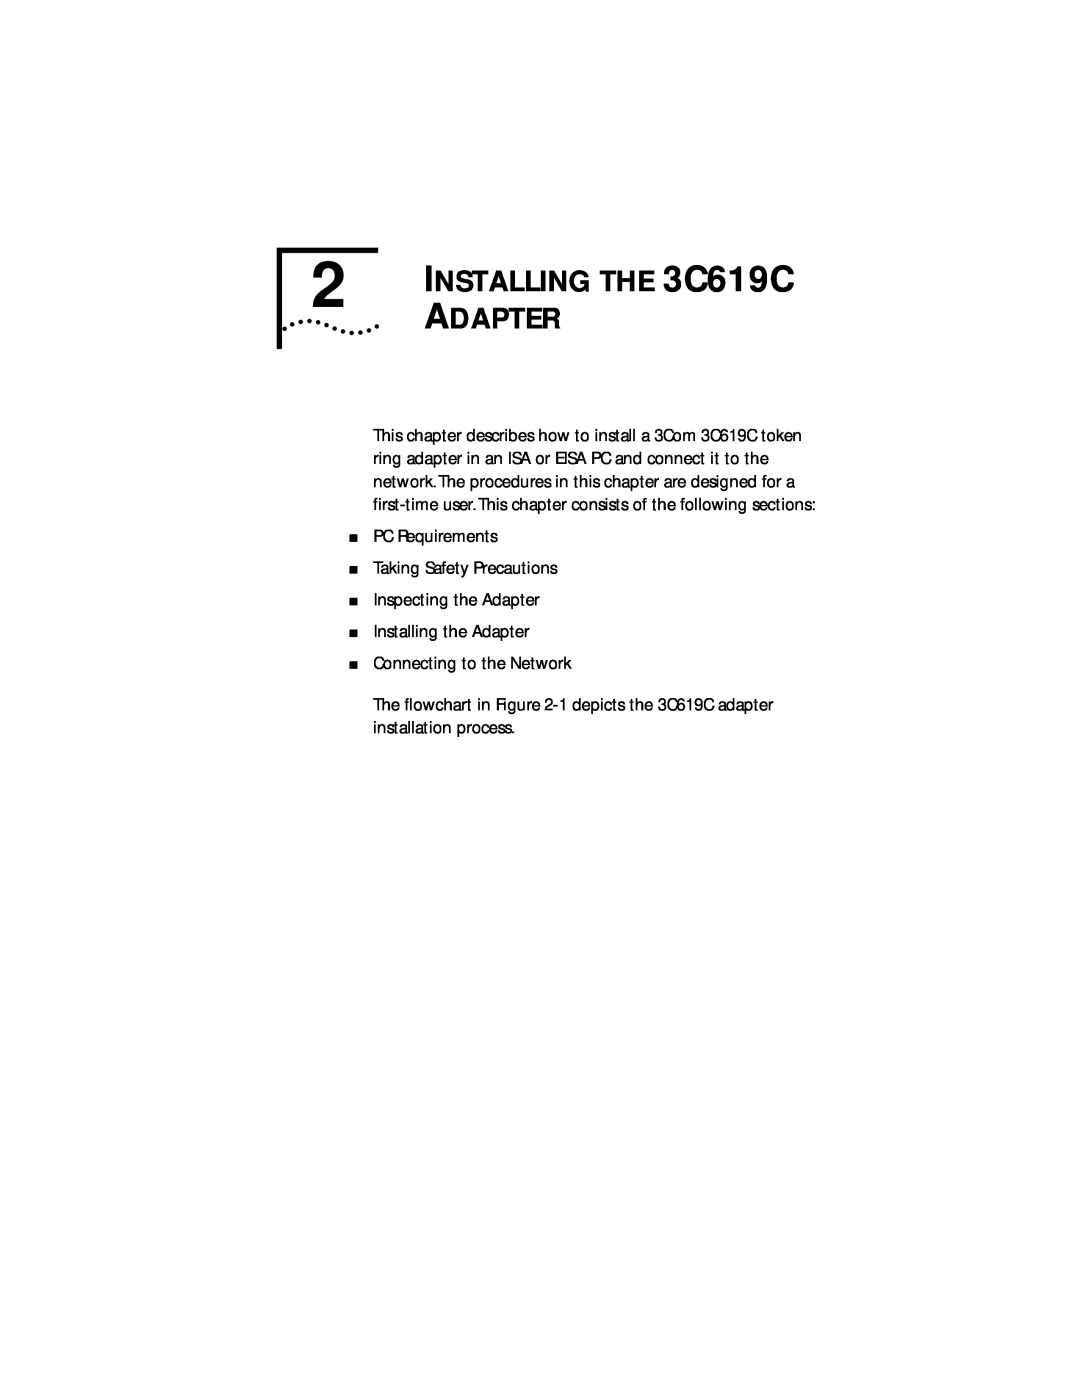 IBM 09-0572-000 manual INSTALLING THE 3C619C, PC Requirements Taking Safety Precautions Inspecting the Adapter 